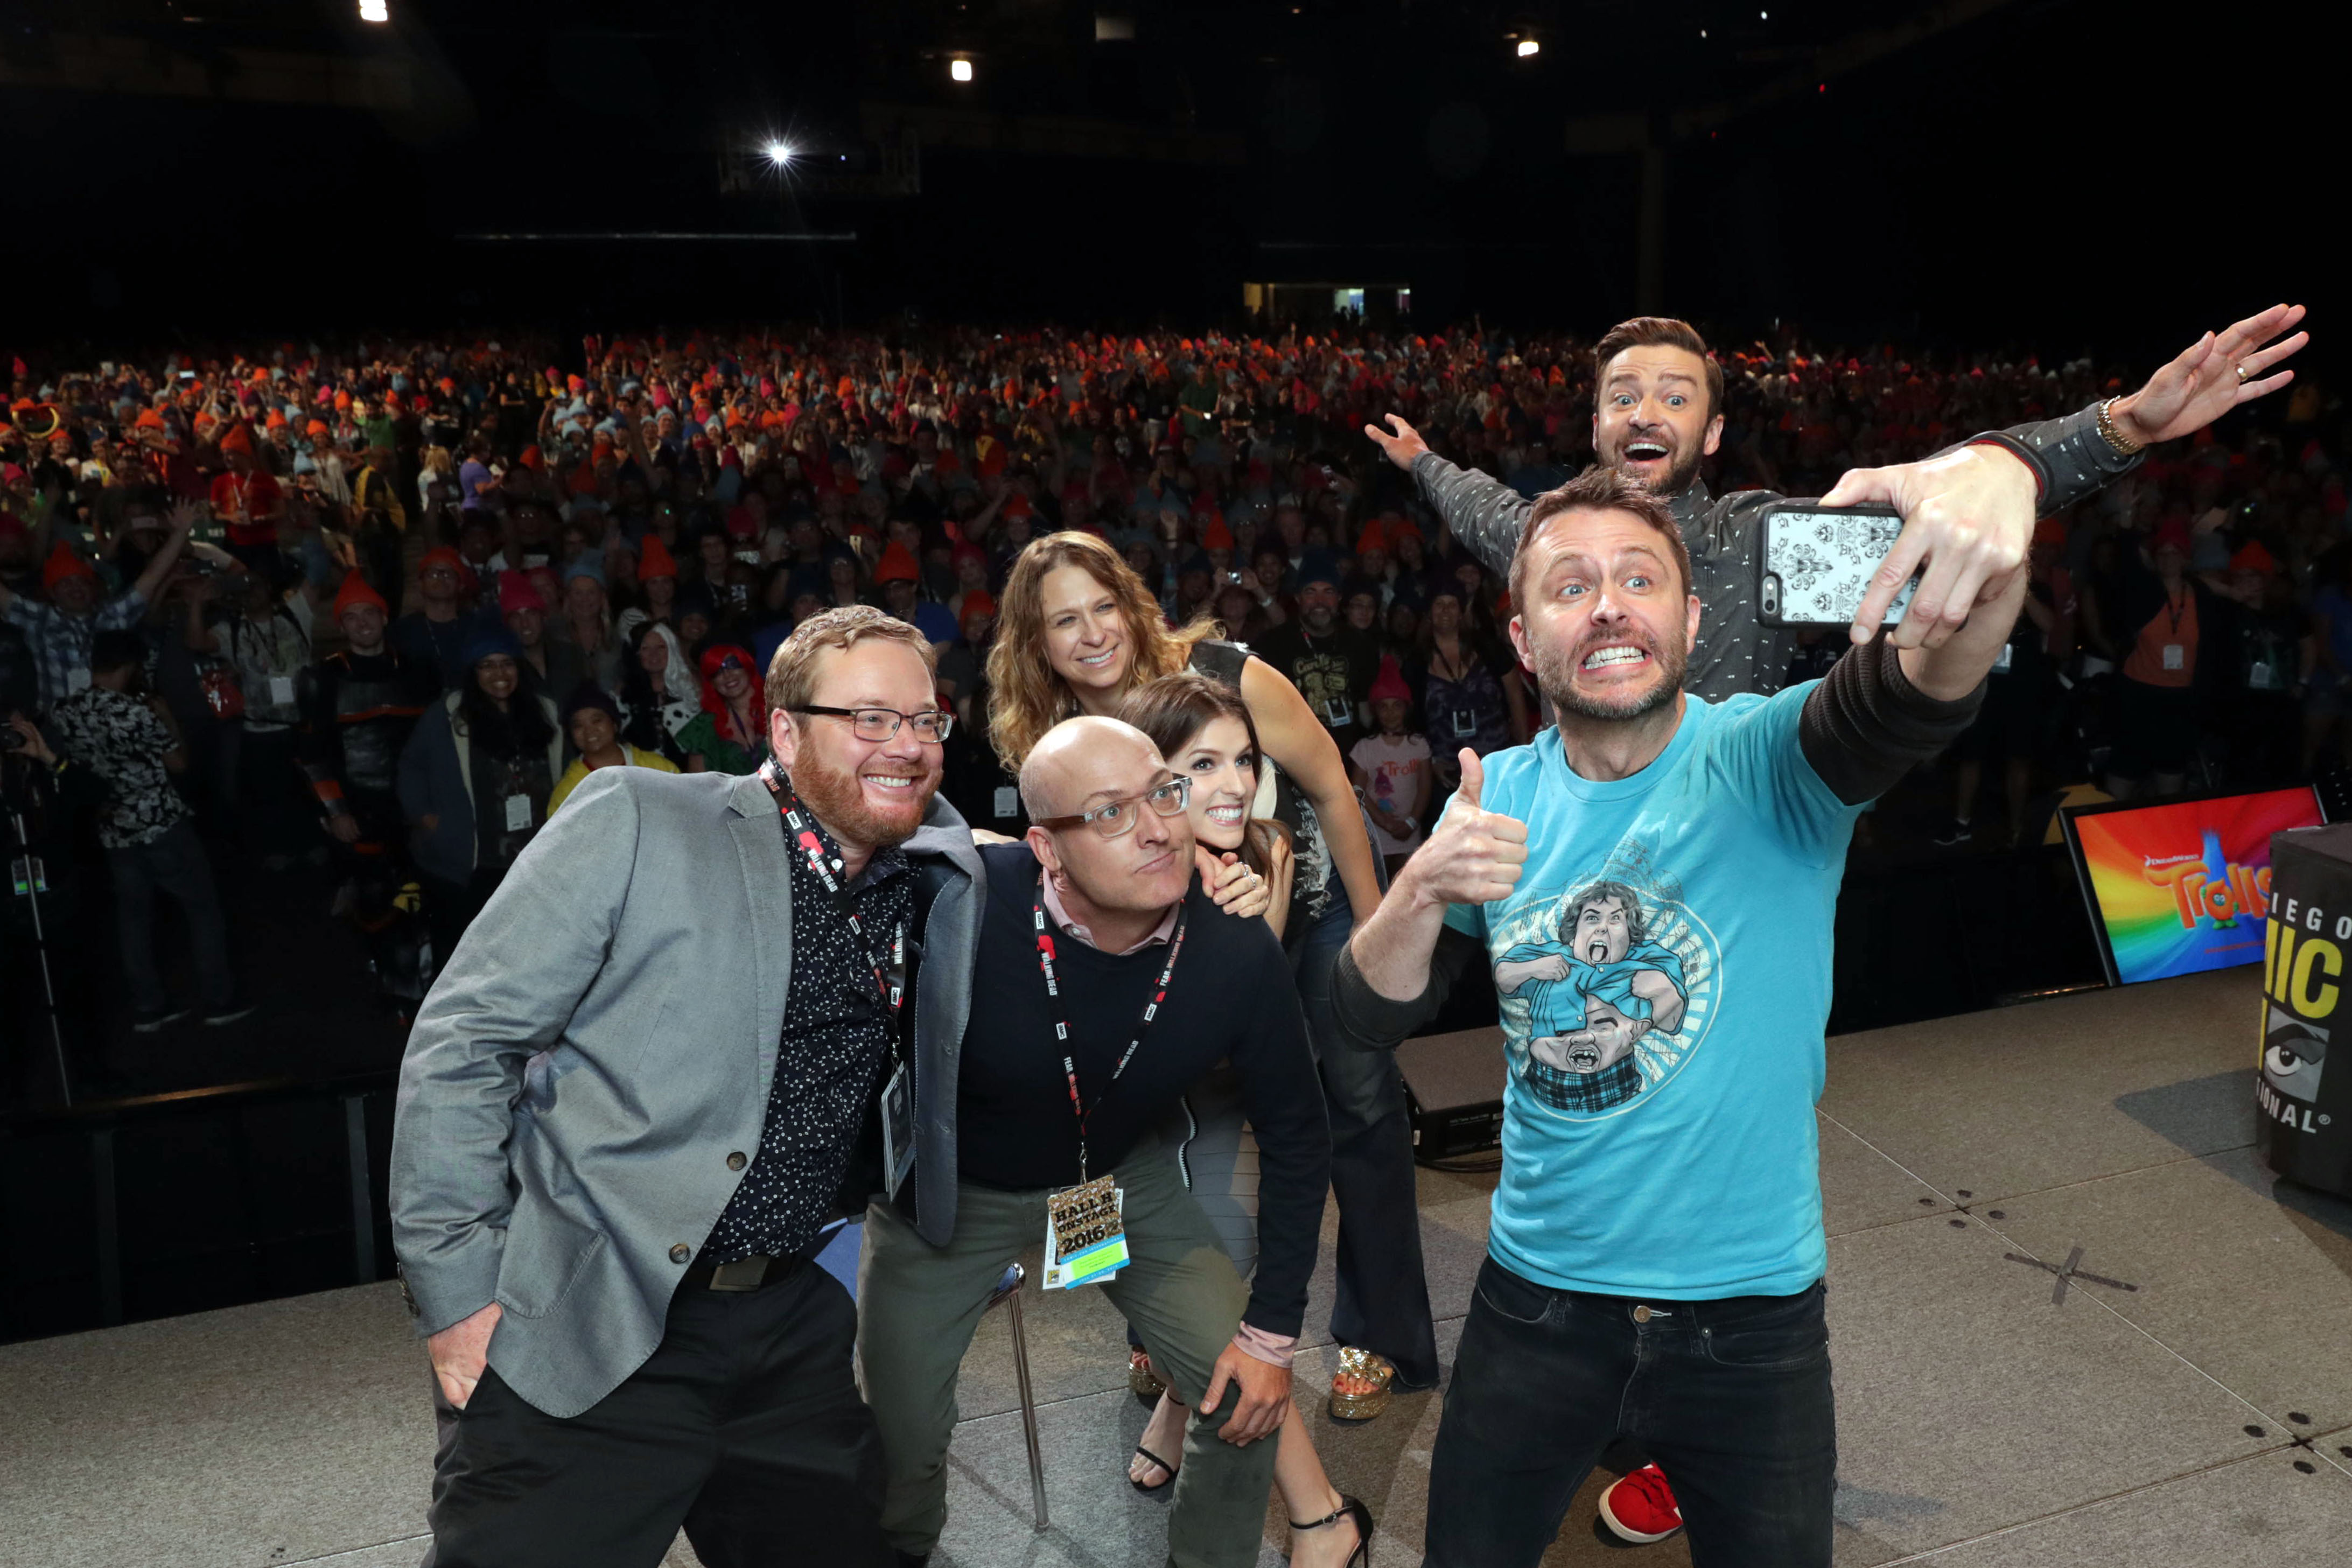 TROLLS filmakers and voice actors take a selfie with the audience at DreamWorks Animation's Comic Con Hall H Panel. (from left) Co-Director Walt Dorn, Director Mike Mitchell, Anna Kendrick, Producer Gina Shay, Moderator Chris Hardwick, and Justin Timberlake.